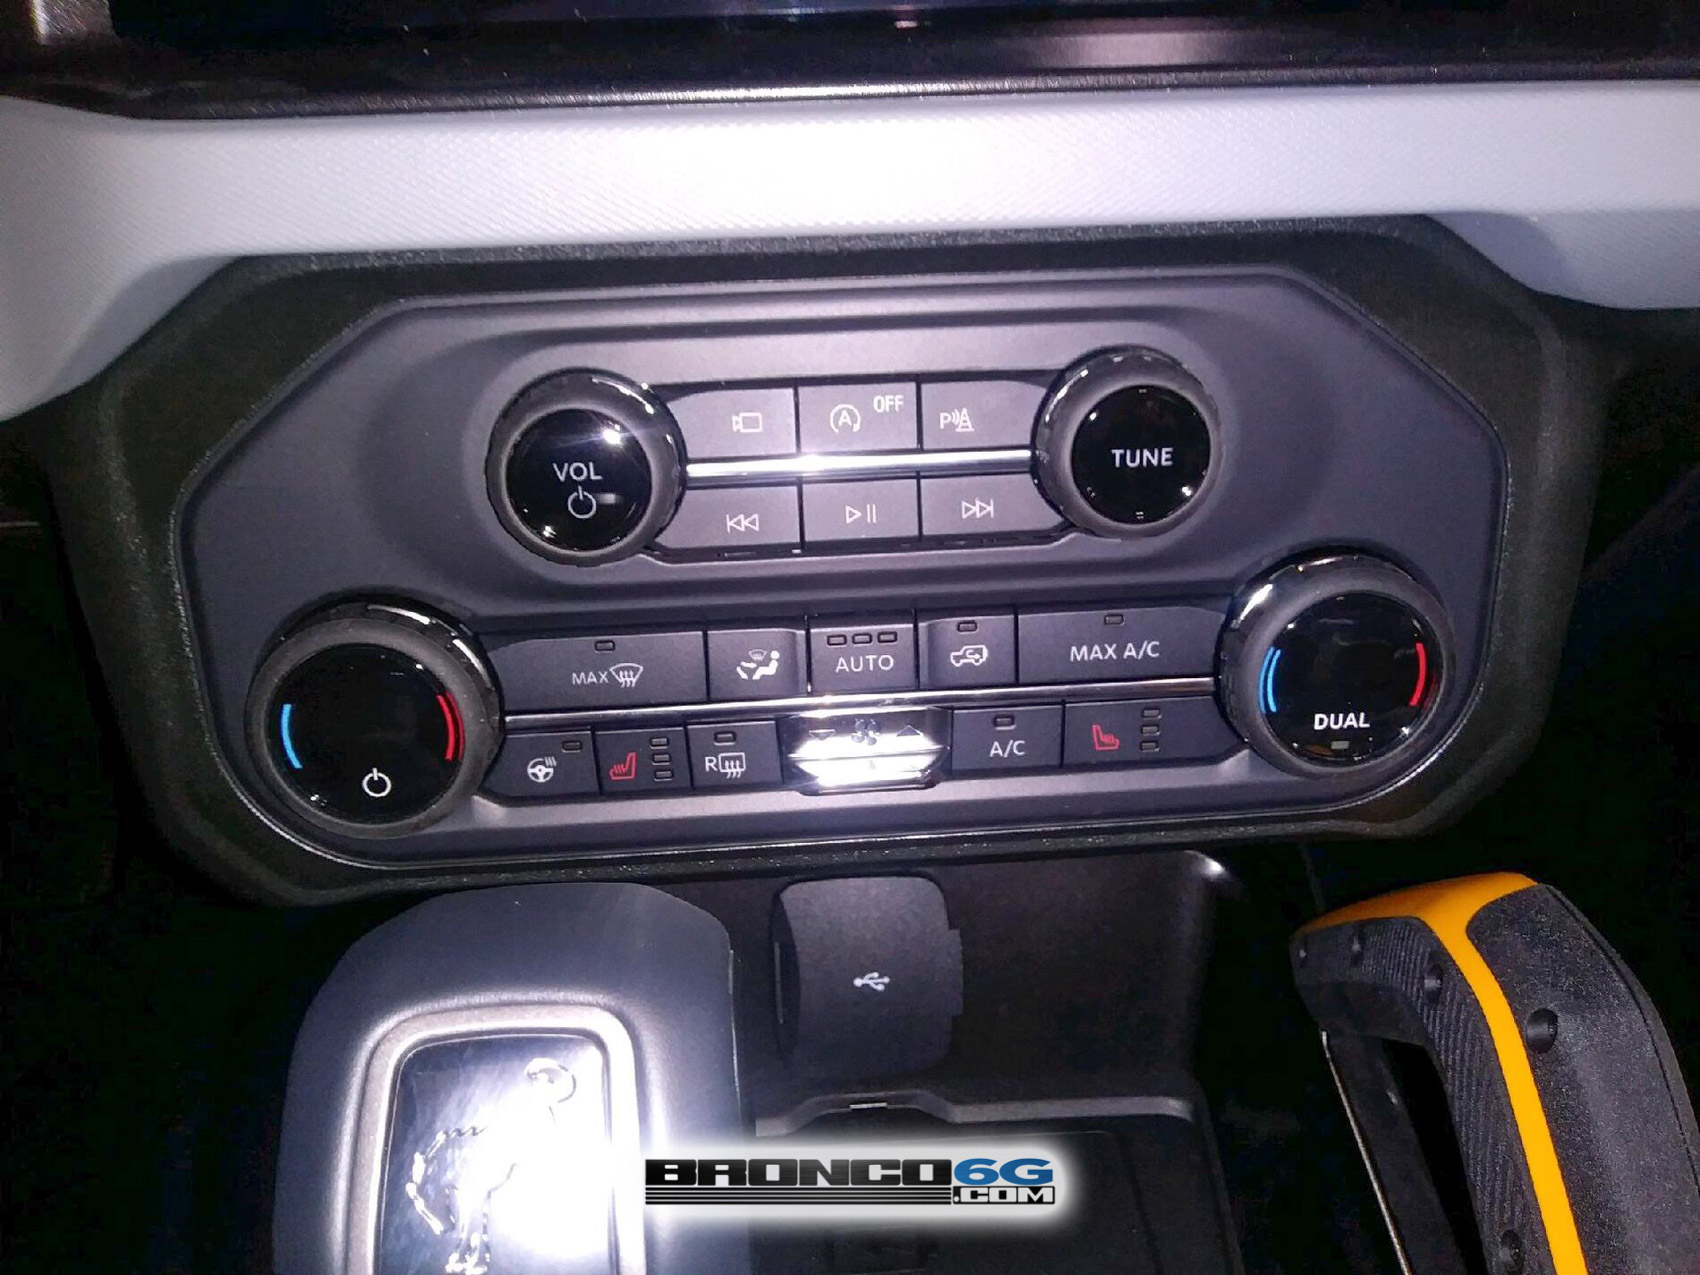 Factory 2021 Bronco interior buttons dashboard switches 3.jpg